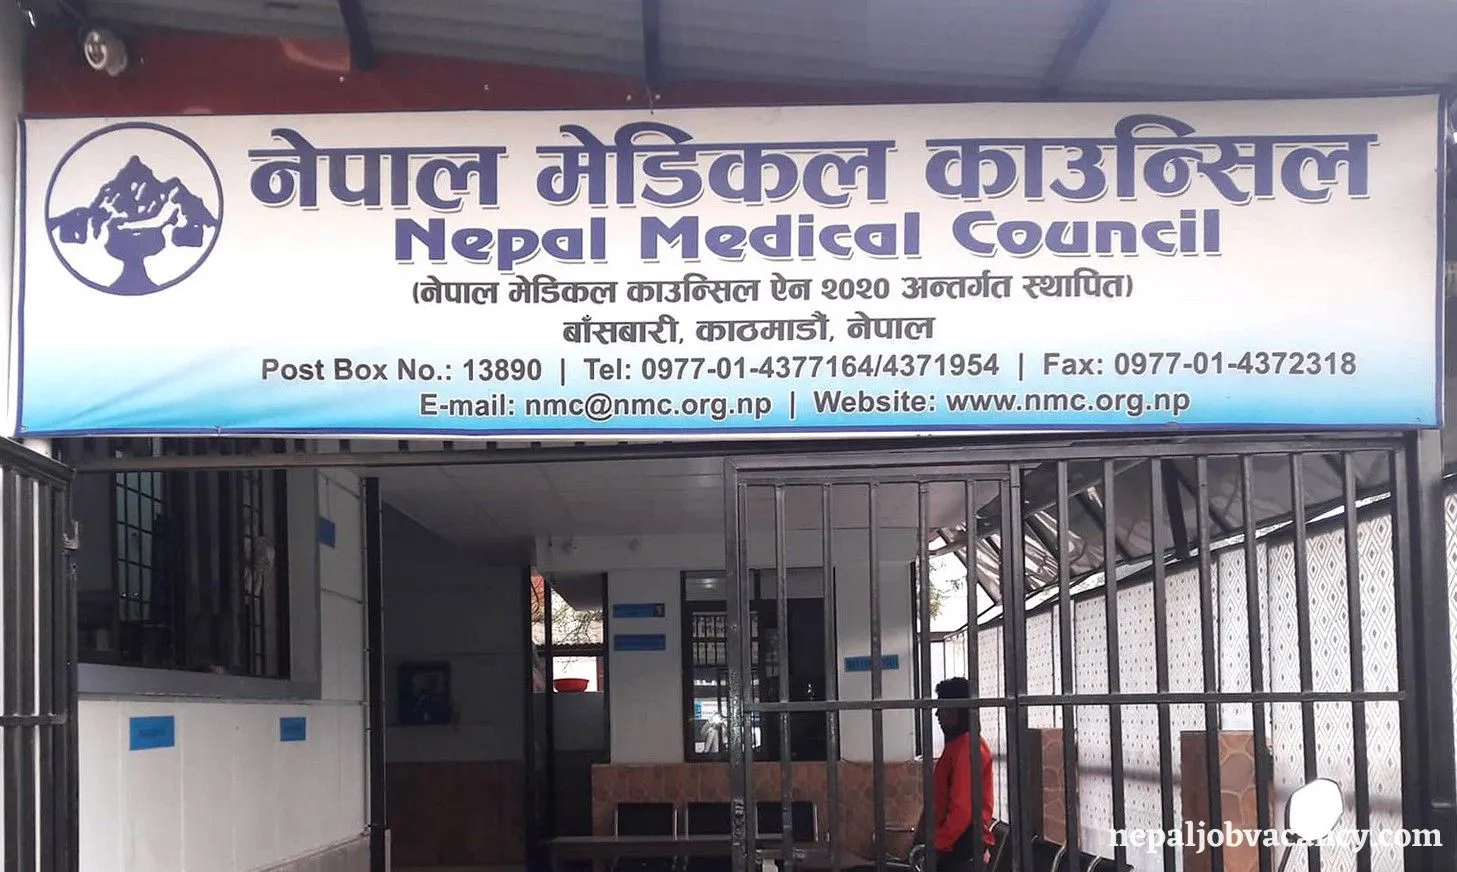 (NMC) Nepal Medical Council Published 65th Licensing Exam Schedule 2080 Check Application Process